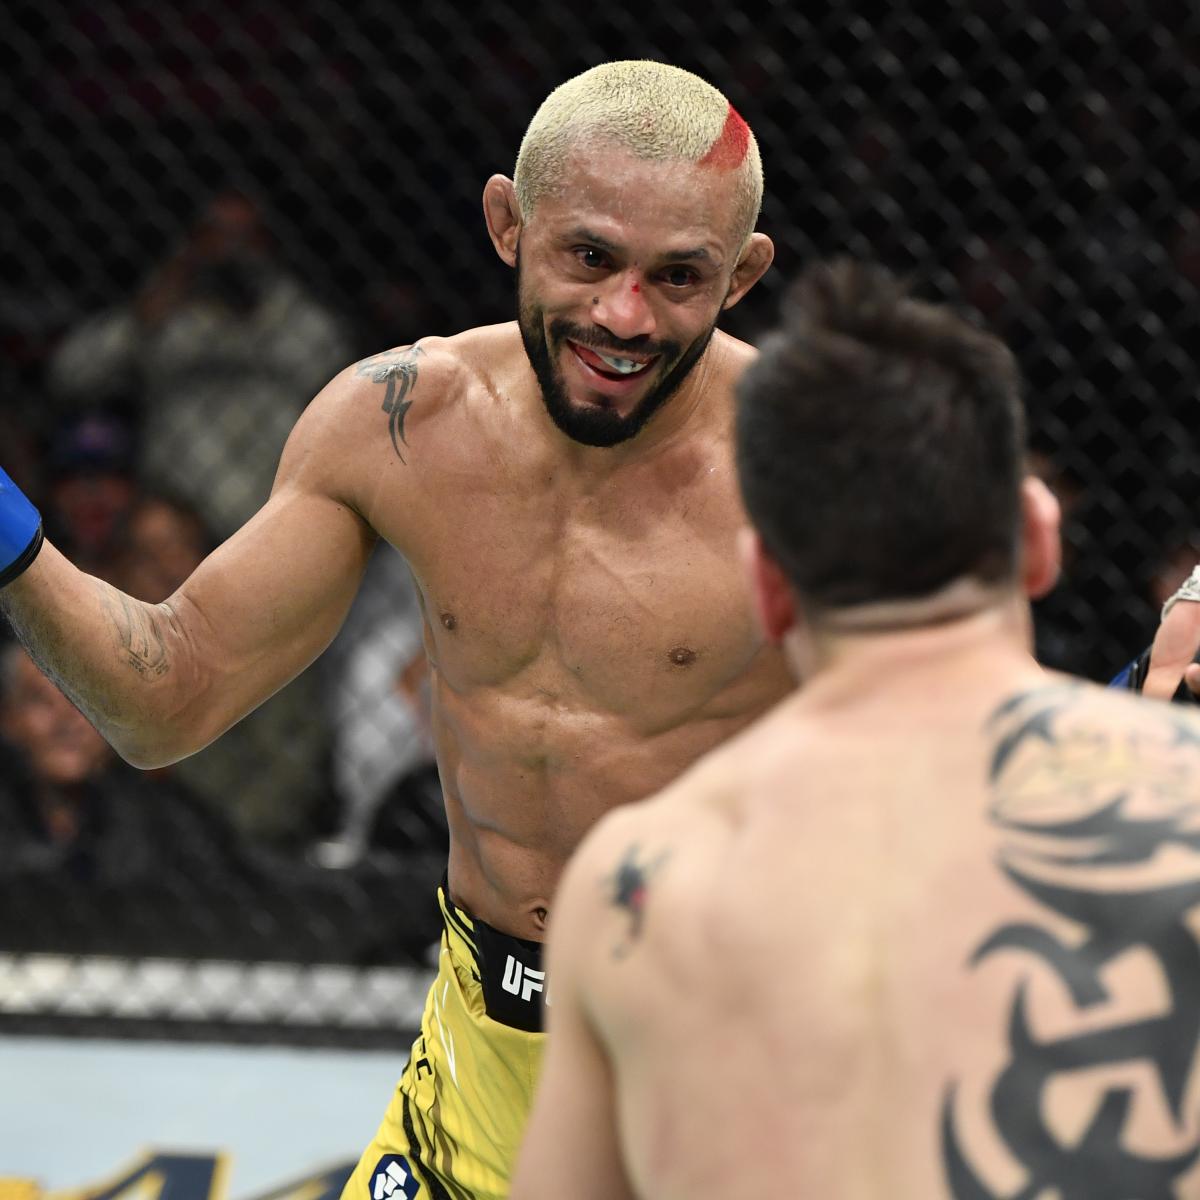 Did you know? #UFC300's Deiveson #Figuierido (-290) is: 🥊tied for 1st with most finishes in the FW division (7) 🥊Most knockdowns in FW with 11 🥊Most Submission attempts at FW with 20 🥊 Never been knocked down 🥊 83% Single Shot Rate 🥊 28% Jab Rate 🥊 27% Kick Rate